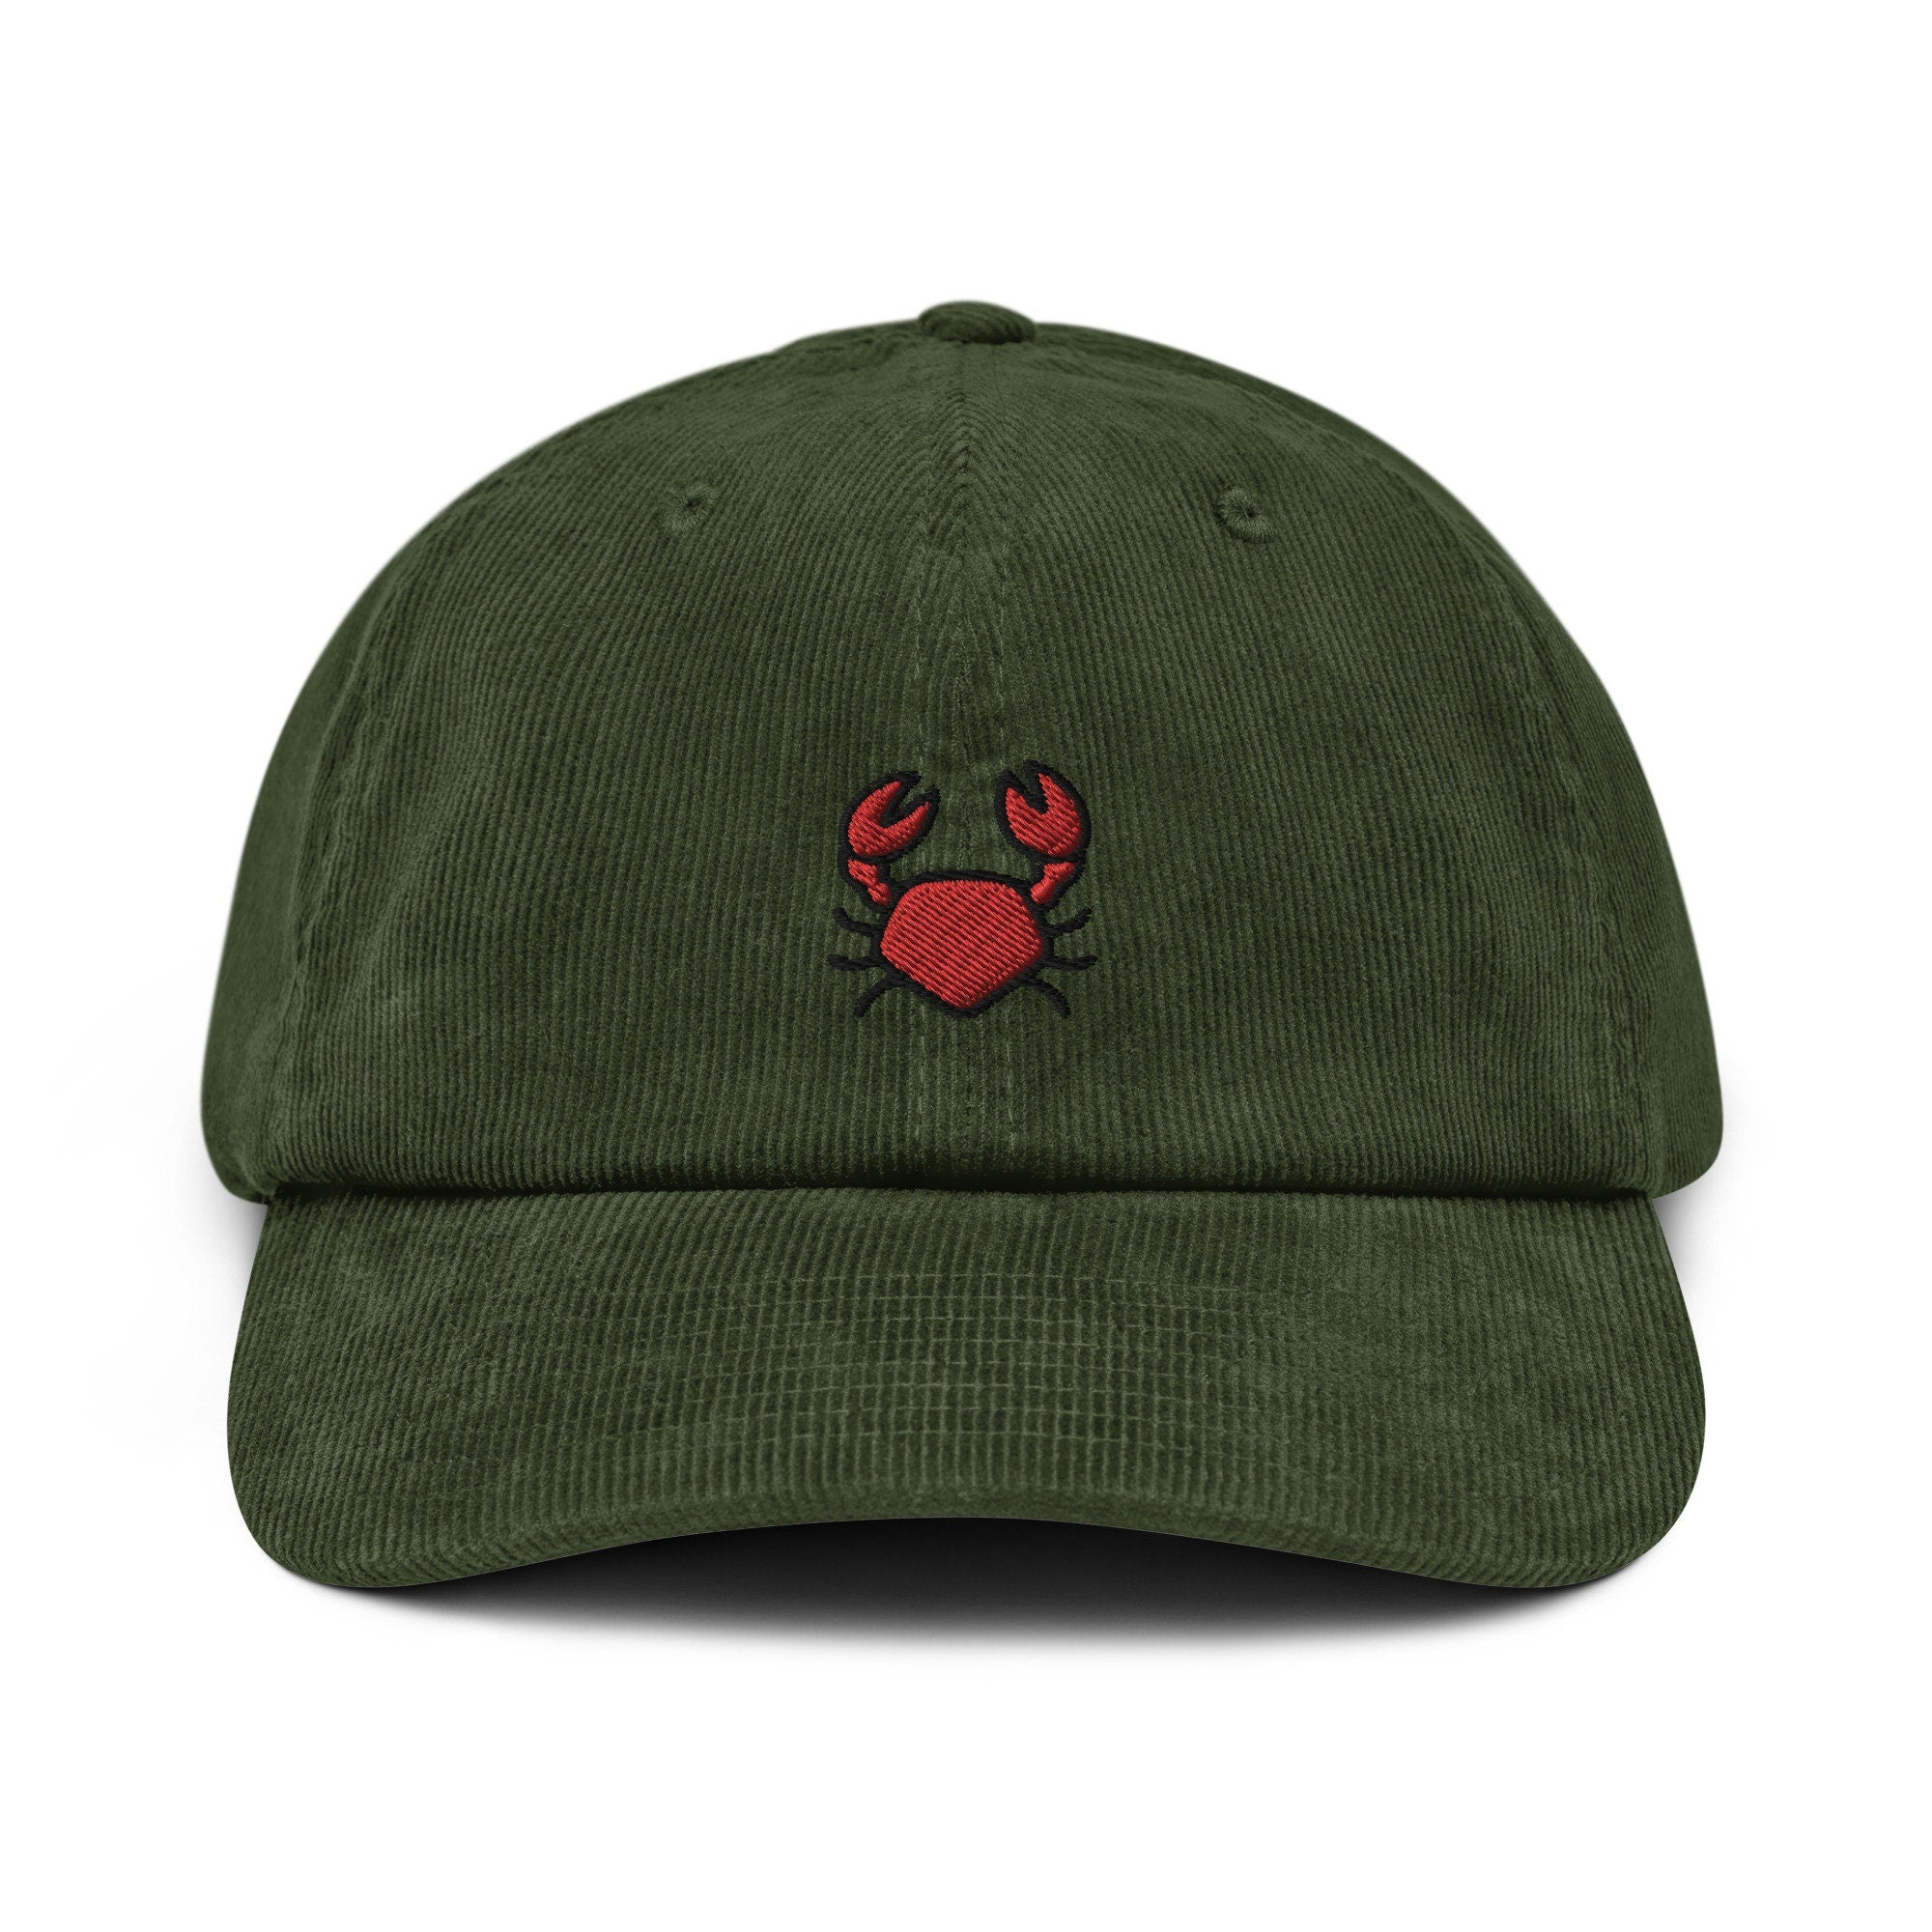 Crab Corduroy Hat, Handmade Embroidered Corduroy Dad Cap - Multiple Colors